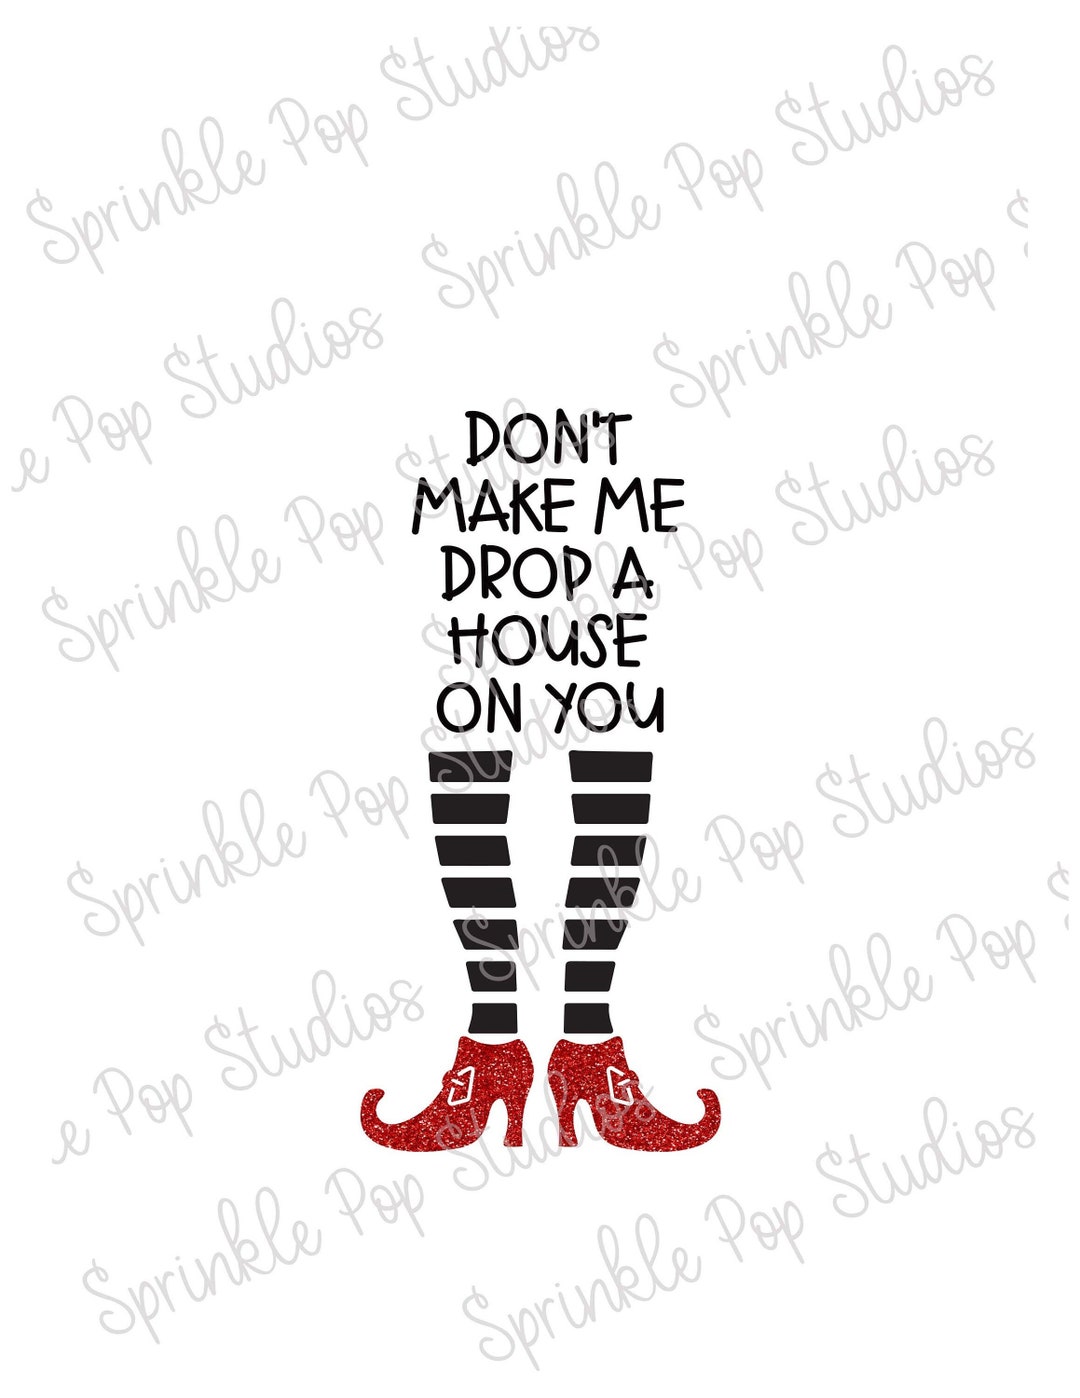 Don't Make Me Drop a House on You Ruby Red Slippers Halloween Design ...